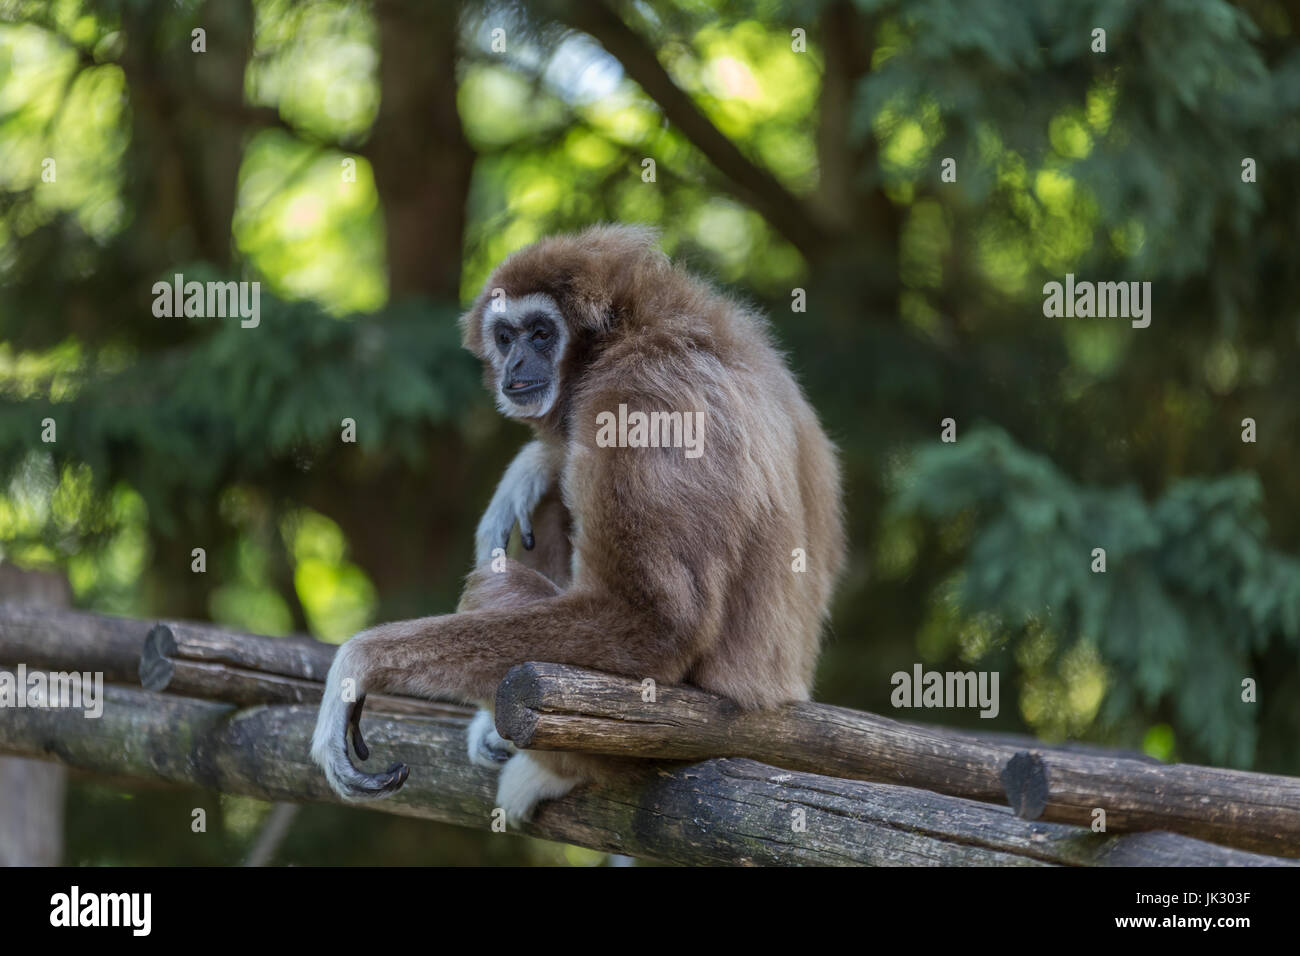 Endangered, cute, agile furry wild primate, Gibon sitting on a lader looking around. Stock Photo